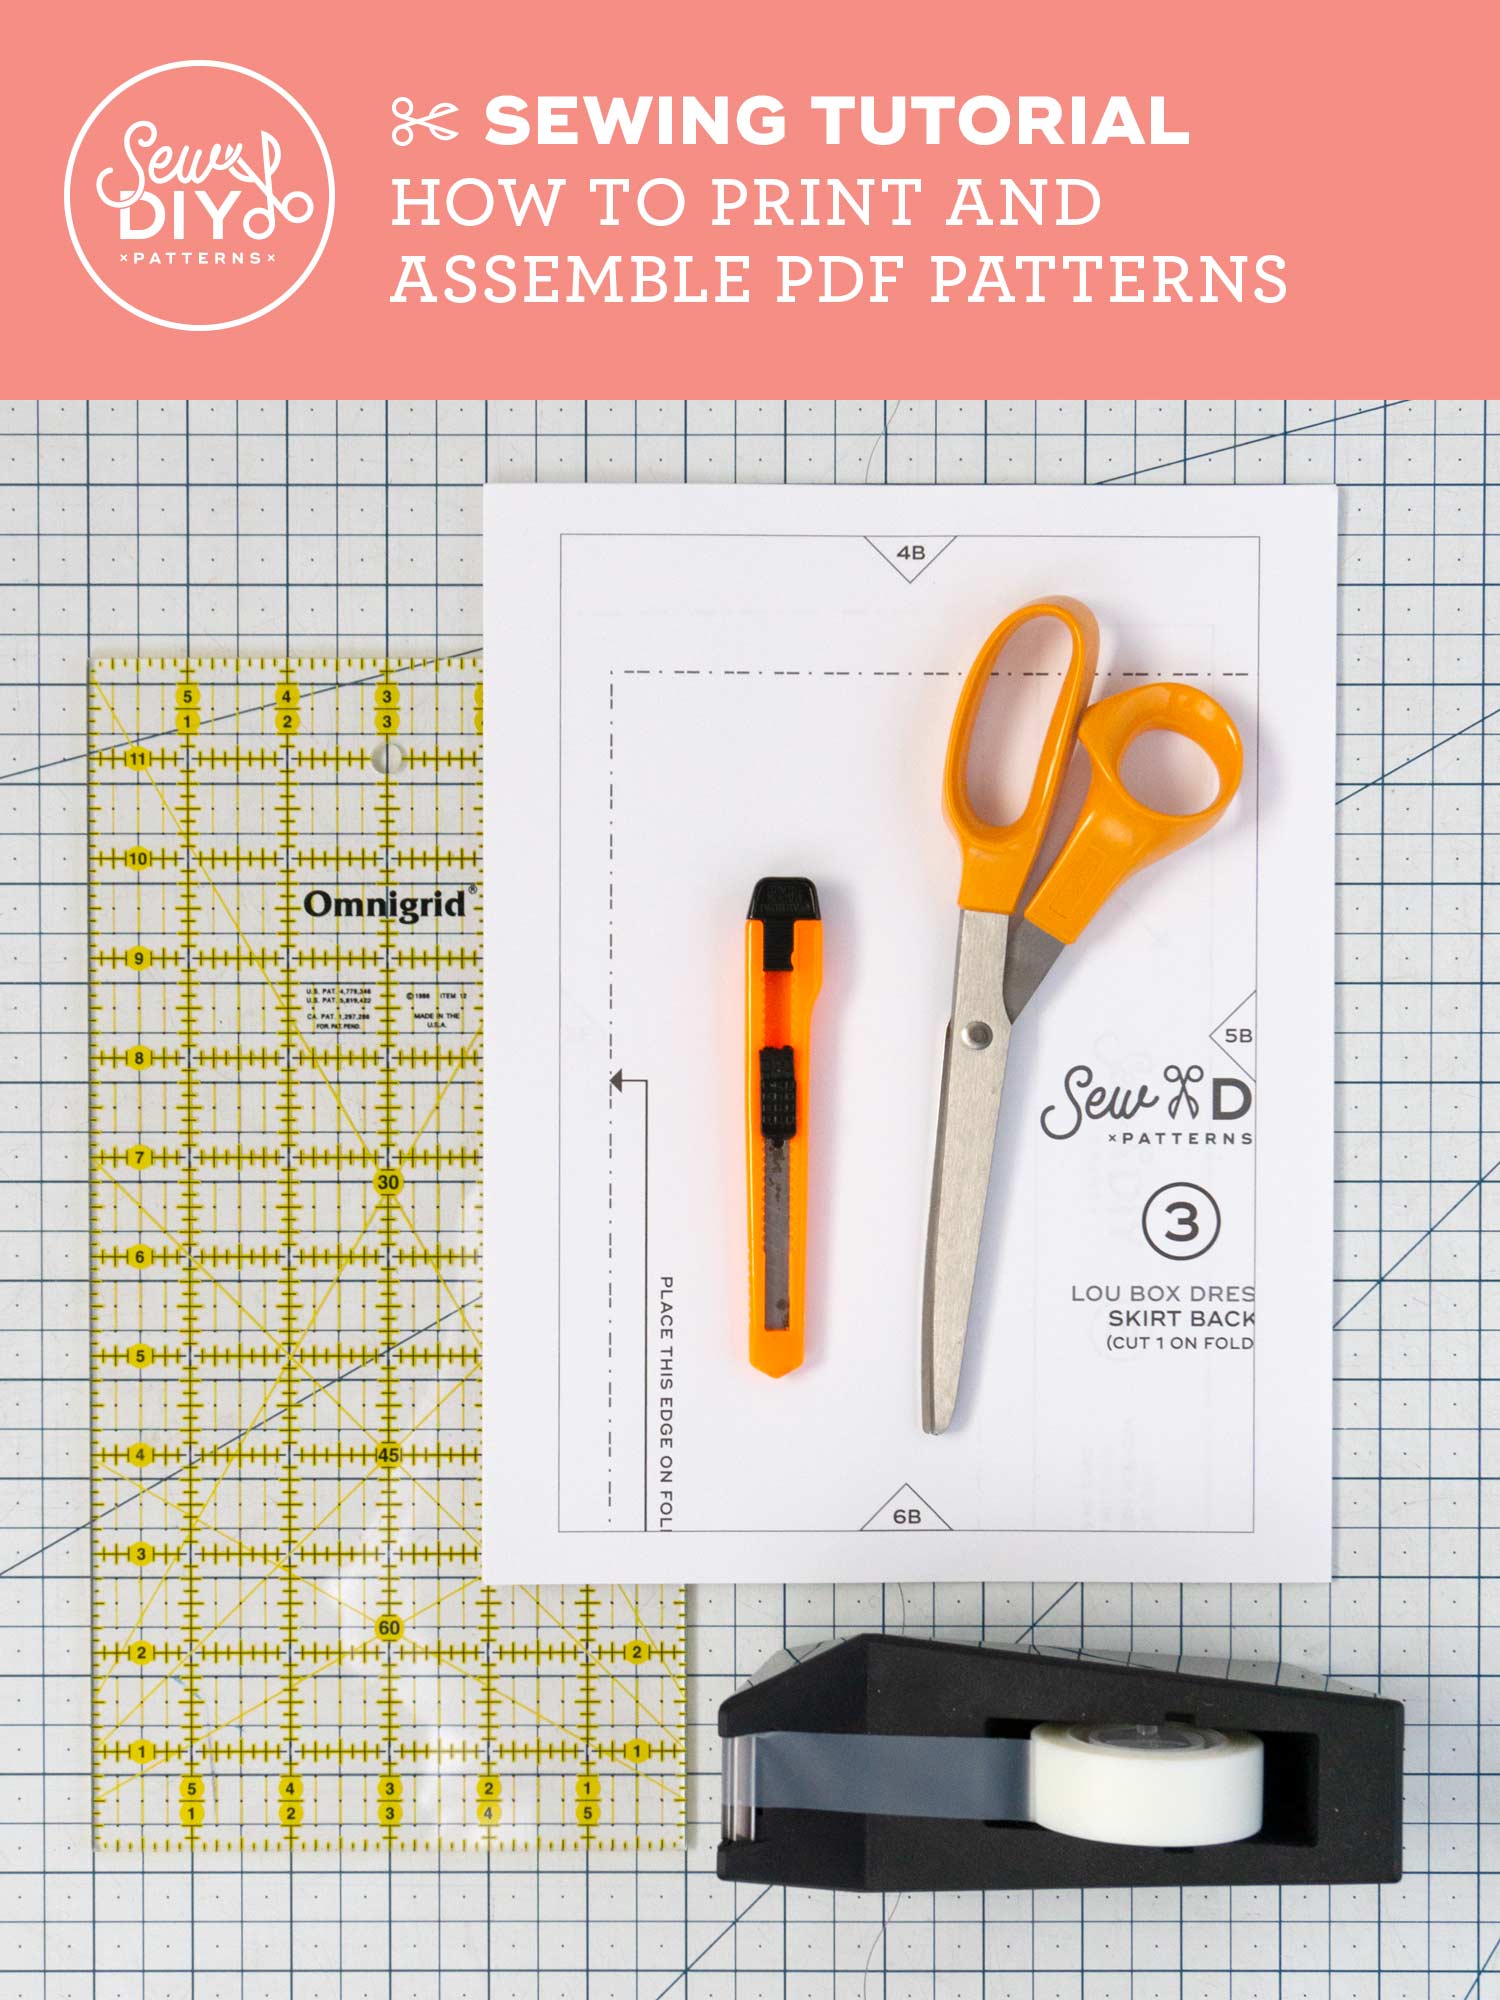 How To Trace A Sewing Pattern (EASY Method) ⋆ Hello Sewing